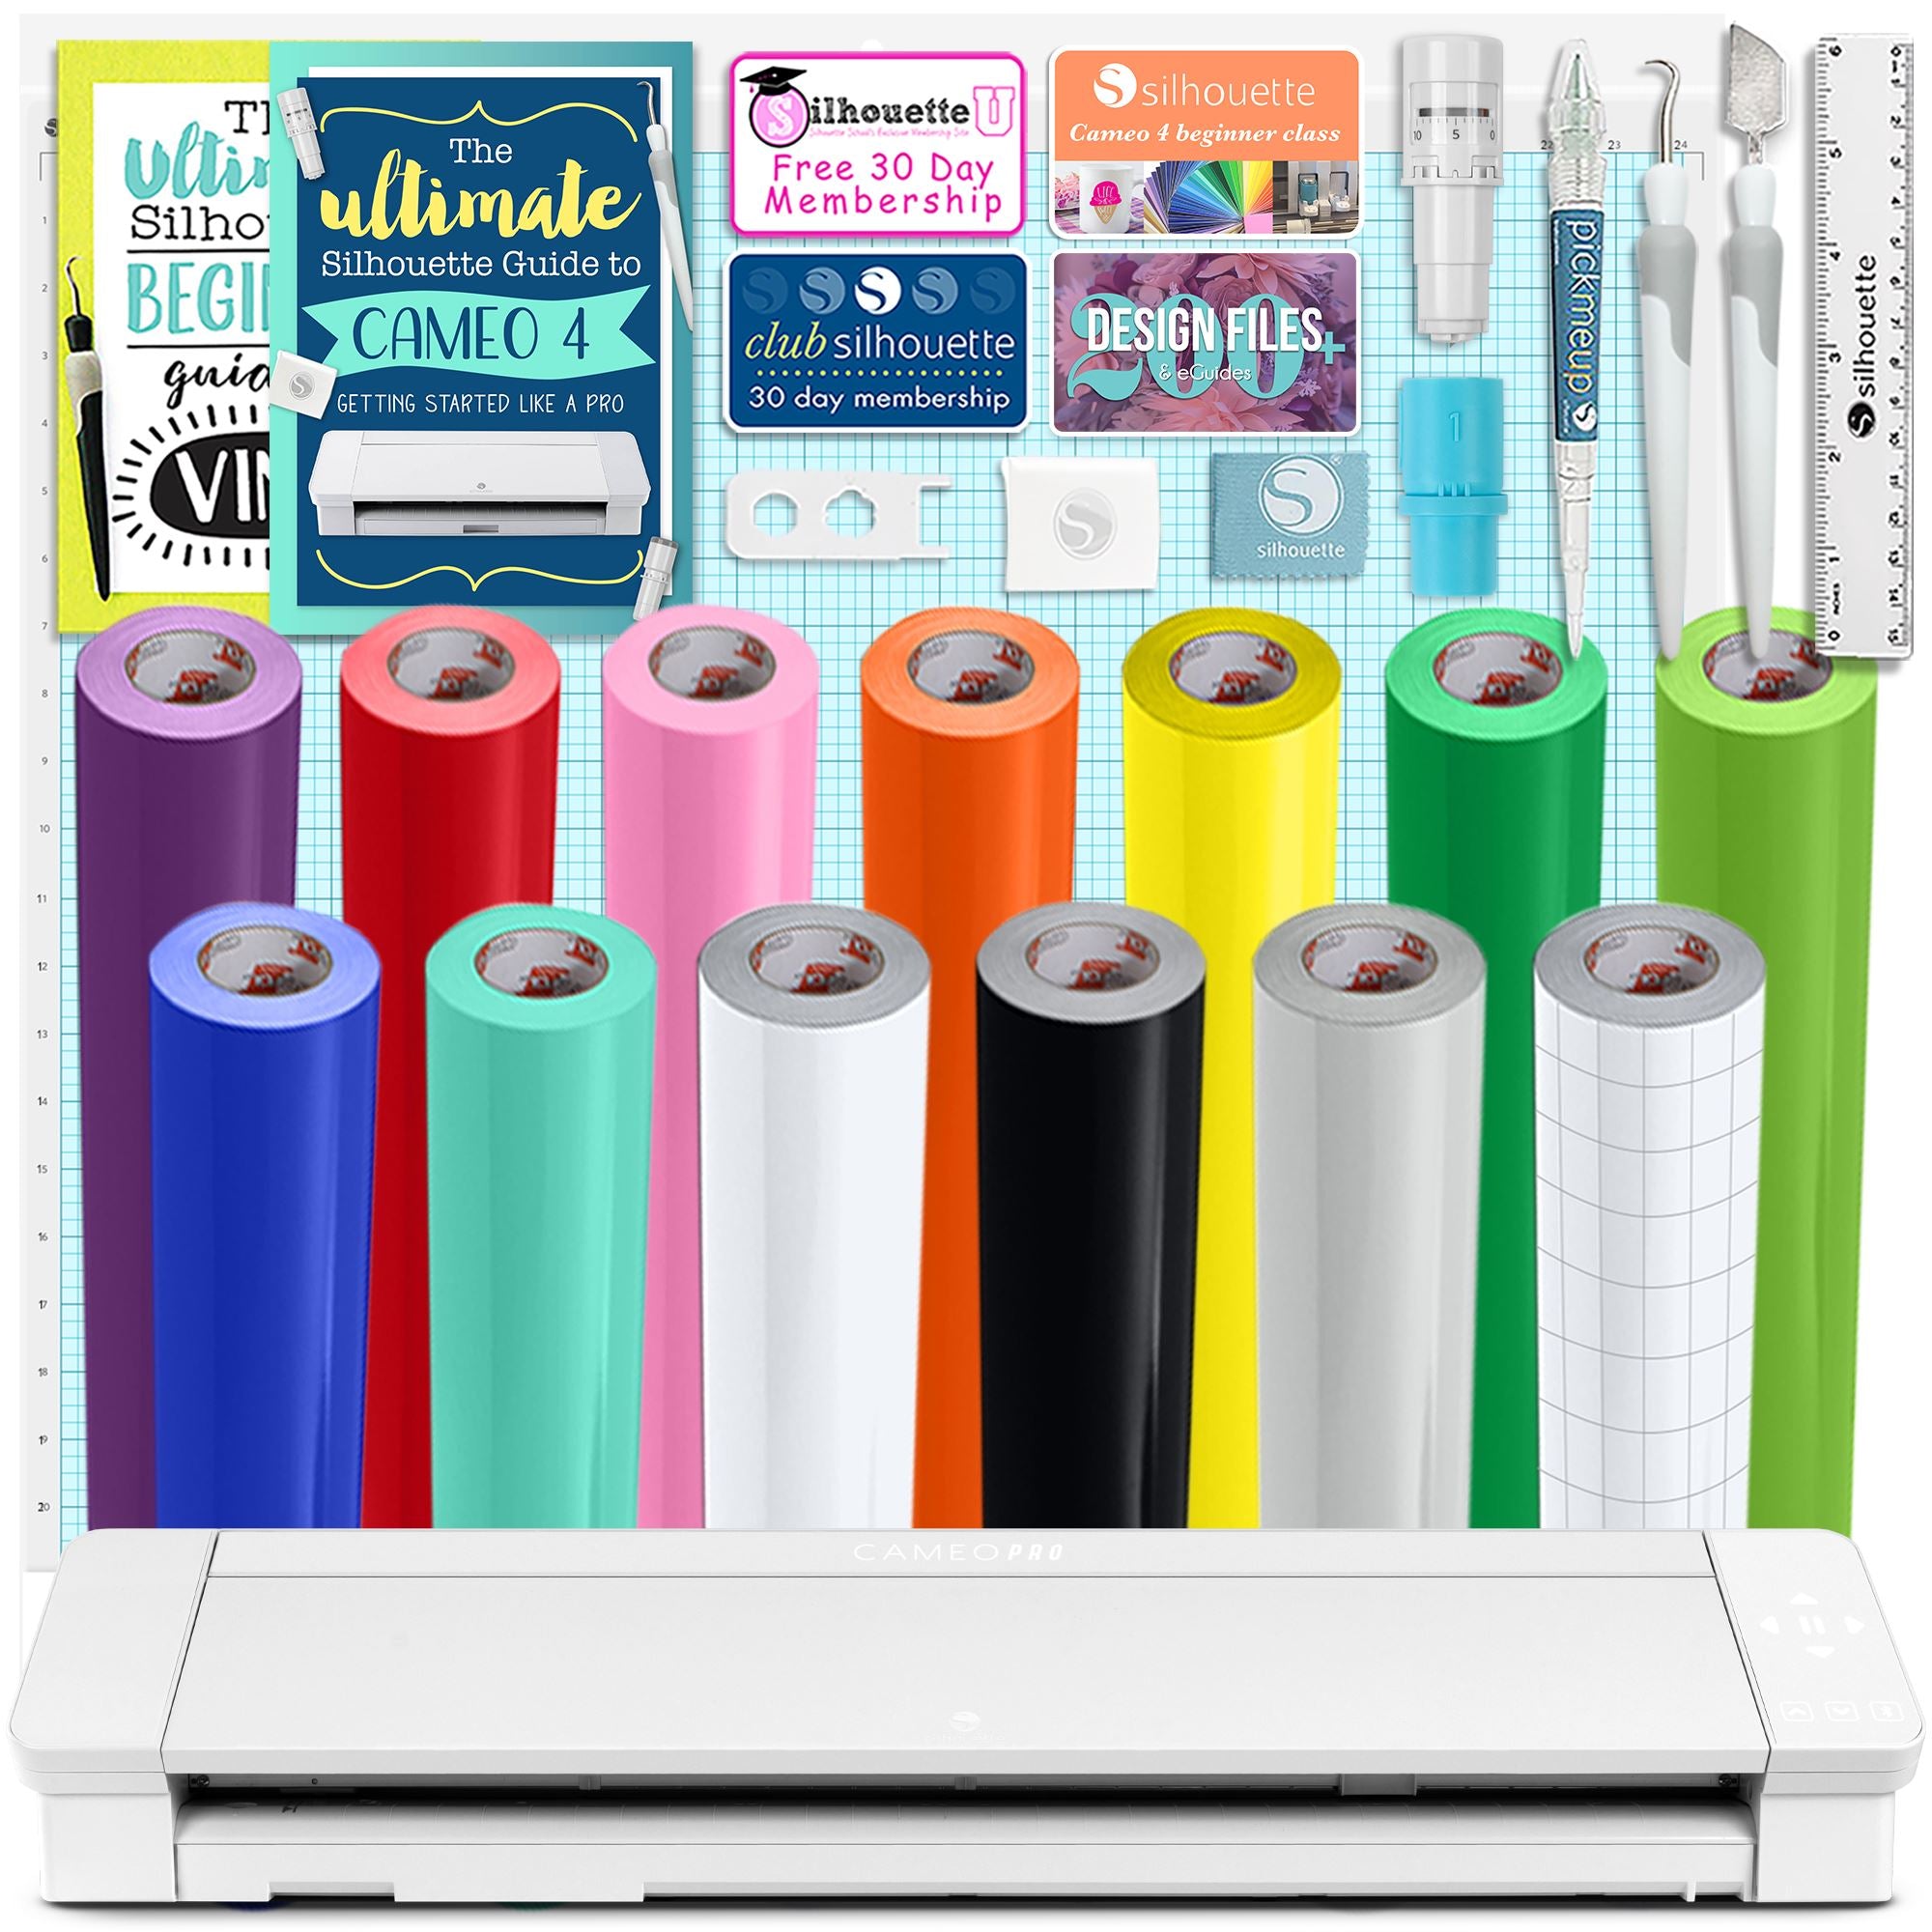 Silhouette Cameo 4 PRO - 24 w/ Oracal 651 24 Wide Vinyl Rolls, Tools,  Guides